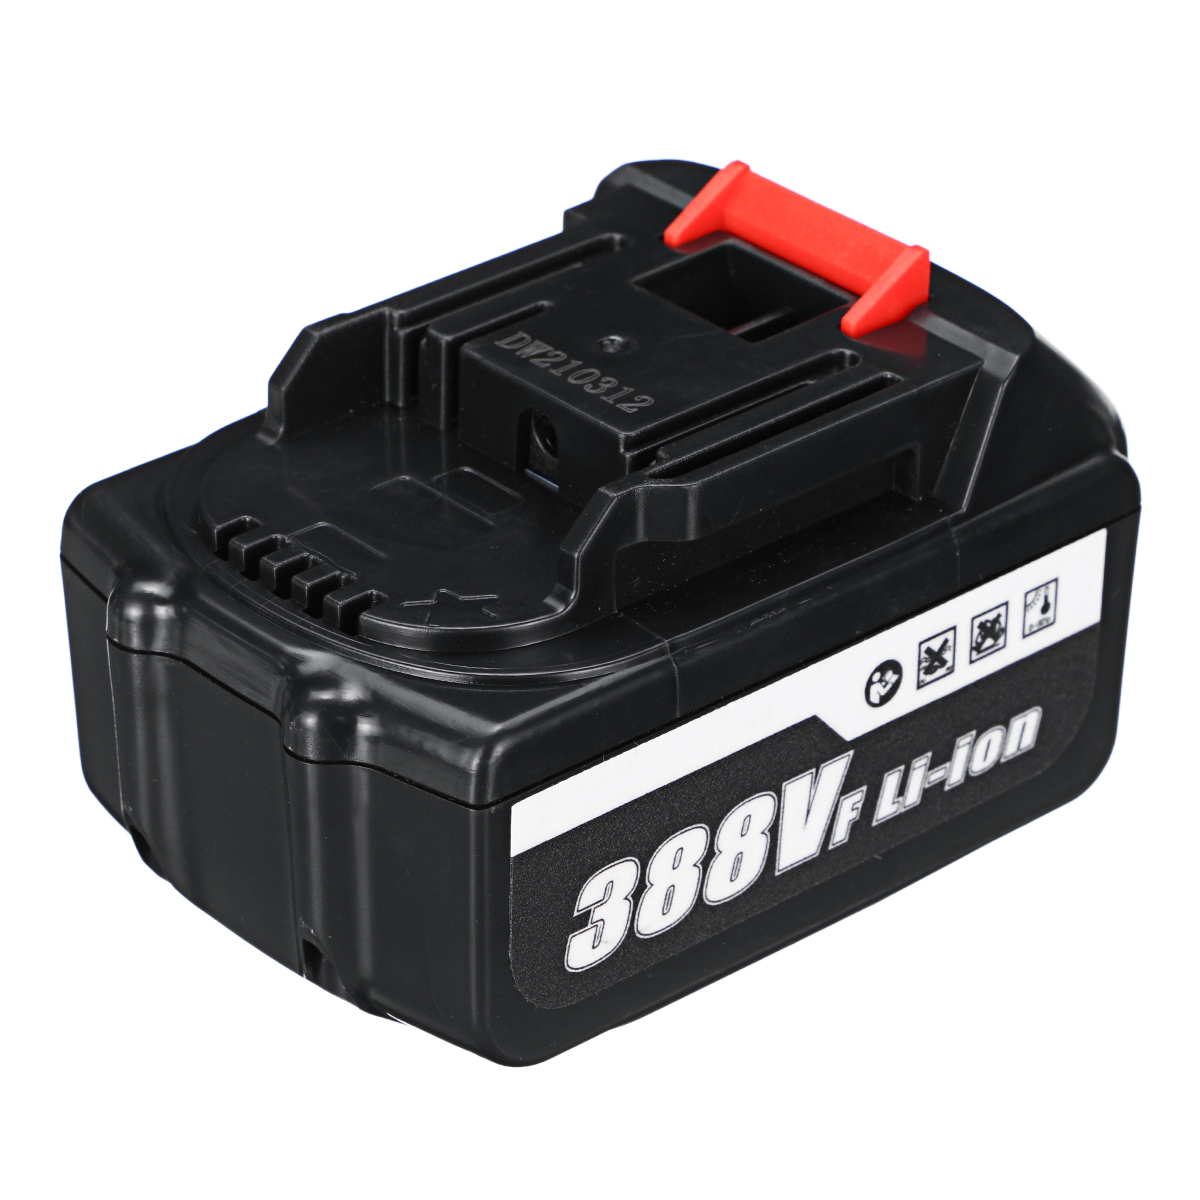 388v-18650-10000mAh-Lithium-ion-Battery-For-Tools-Angle-Grinder-Electromechanical-Drill-1940875-6